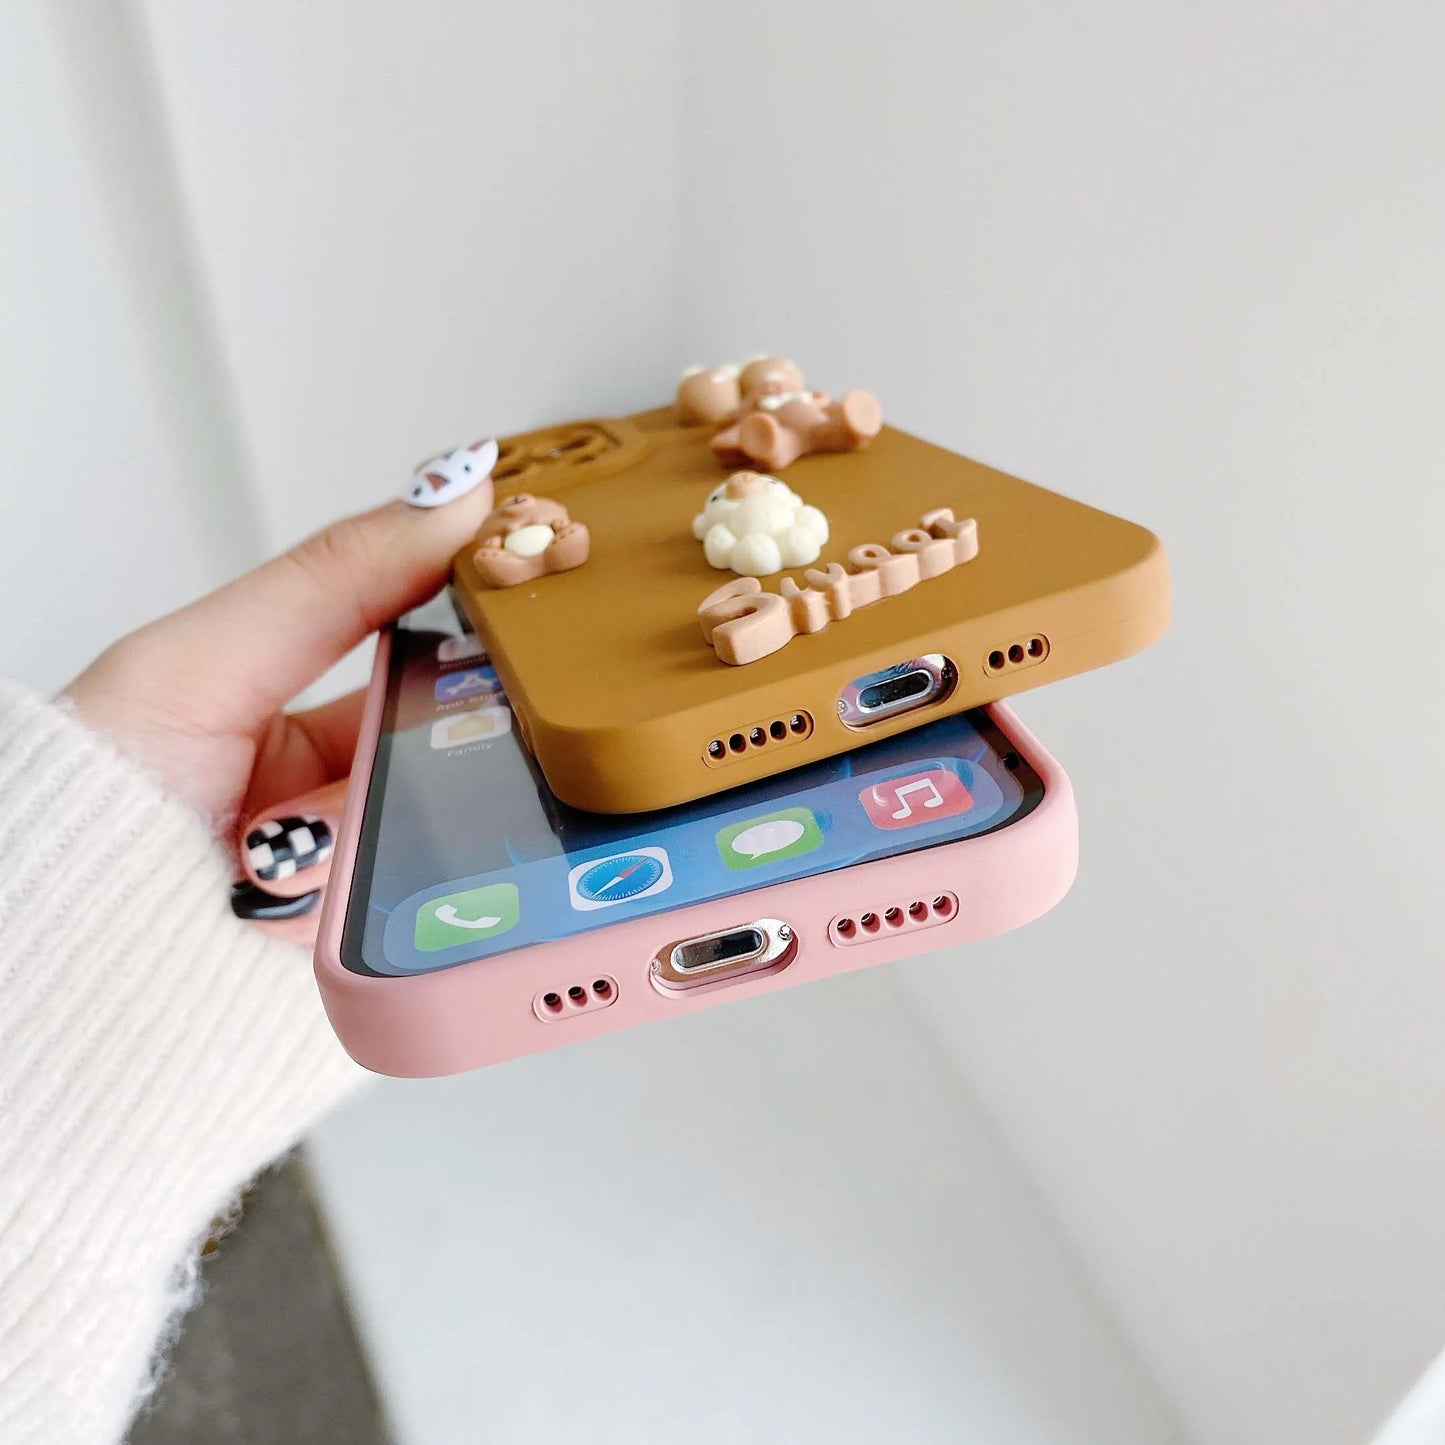 Trendy 3D Bears Phone Cases: Soft Silicon Back Covers for iPhone